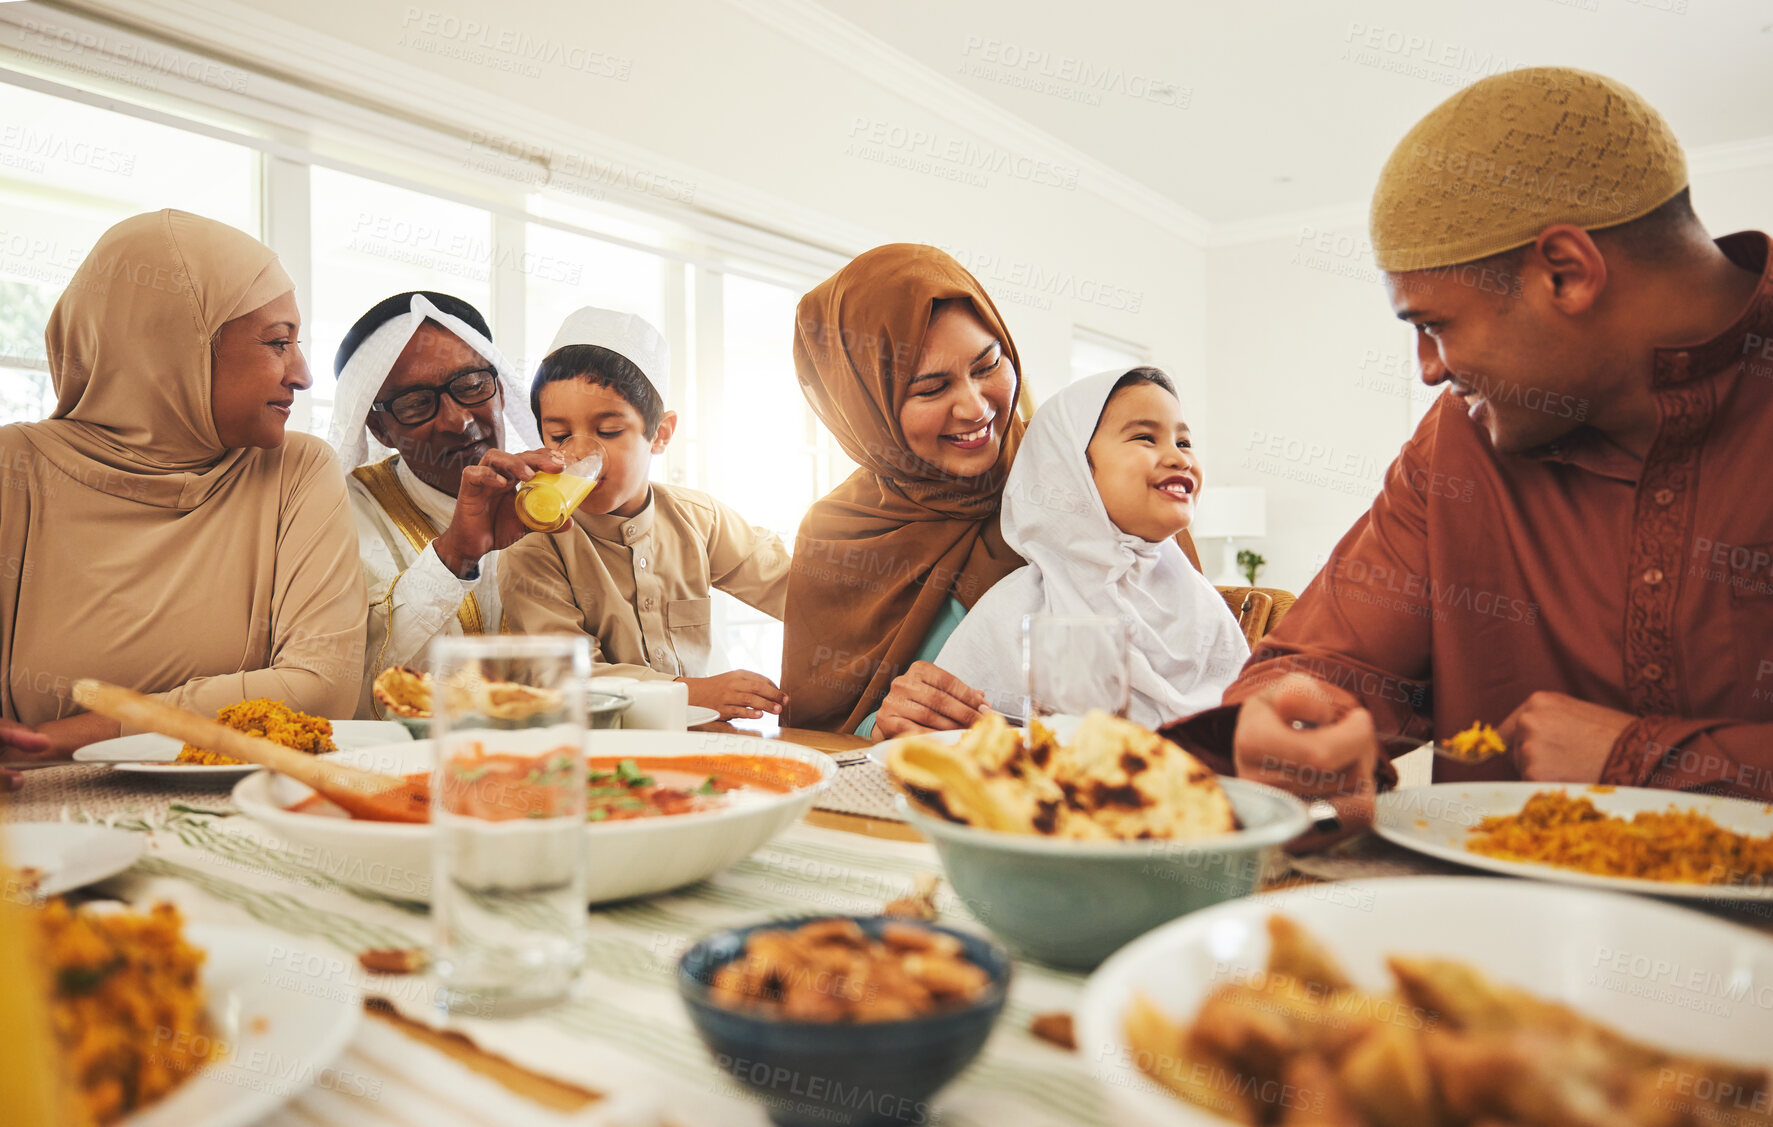 Buy stock photo Food, happy and muslim with big family at table for eid mubarak, Islamic celebration and lunch. Ramadan festival, culture and iftar with people eating at home for fasting, islam and religion holiday